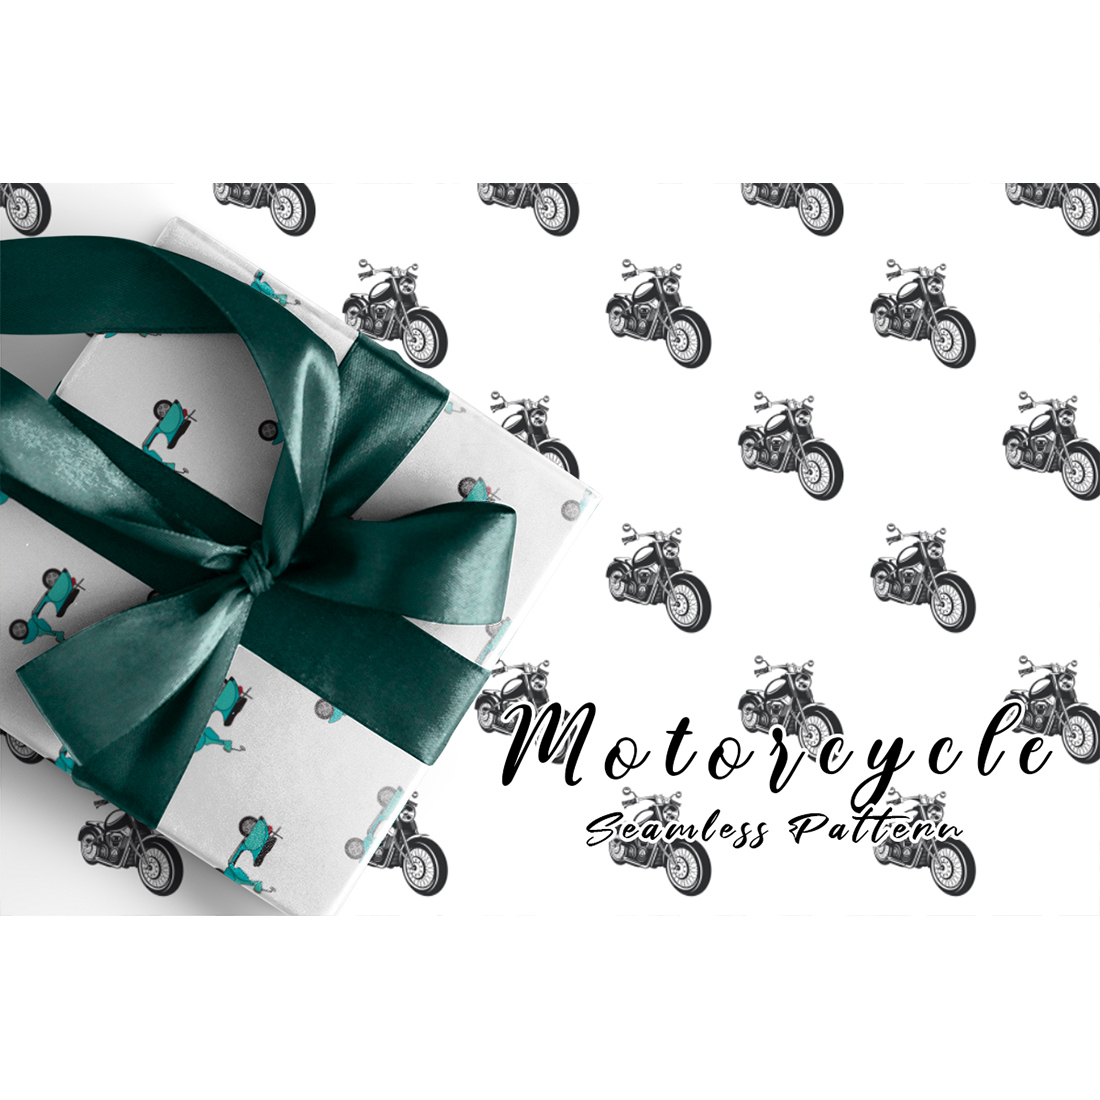 Image with wrapping paper with amazing motorcycle patterns